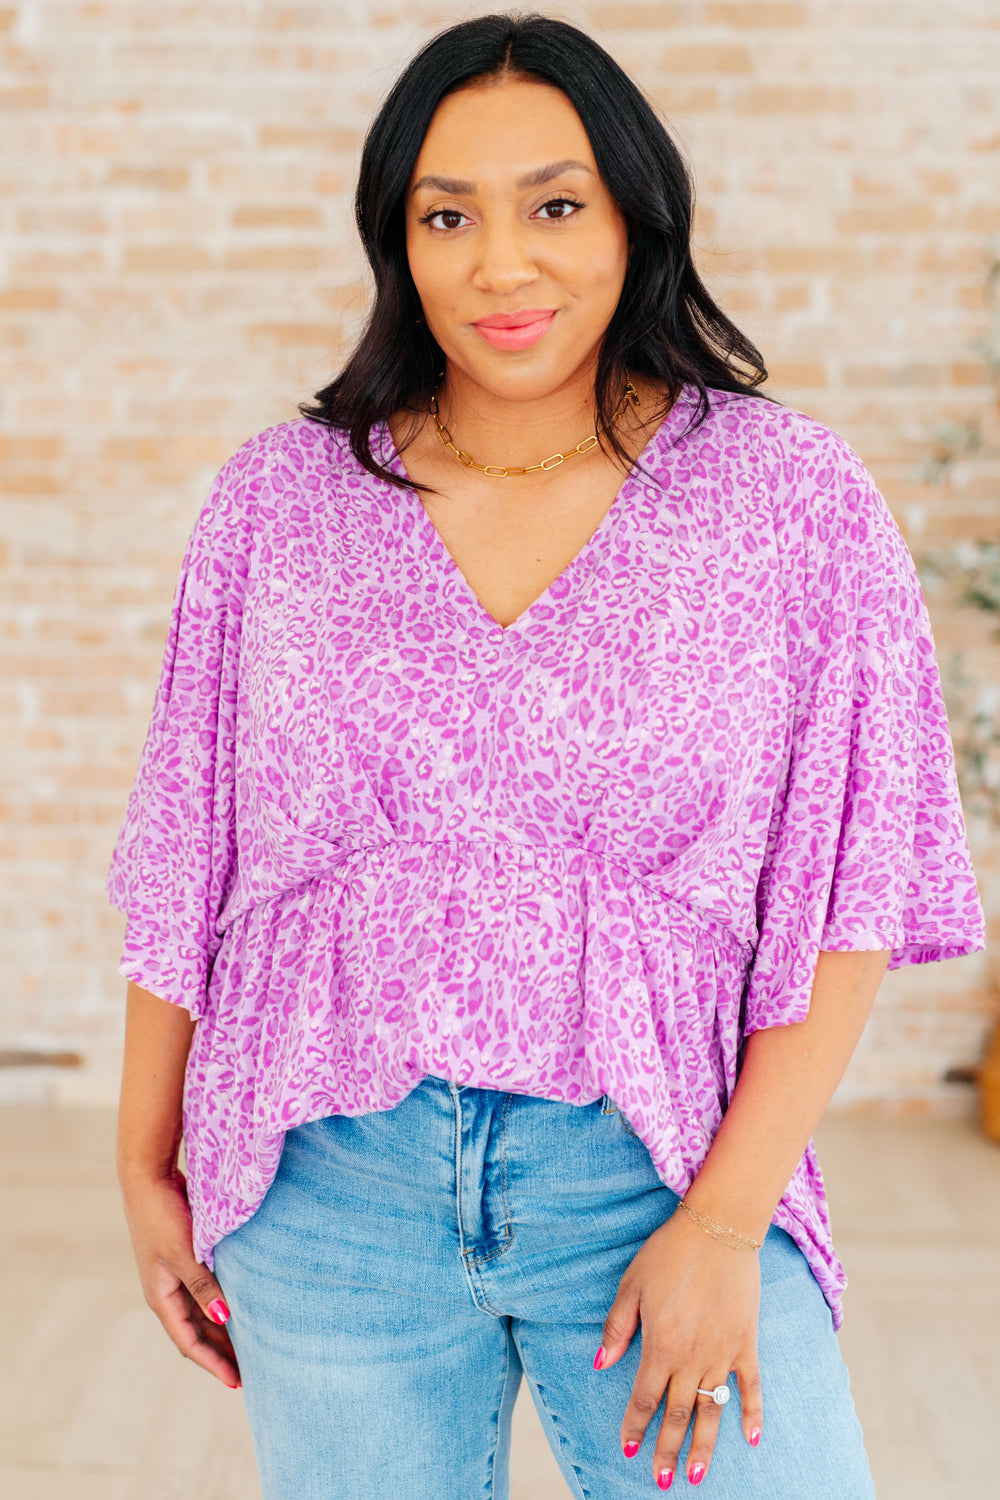 Dreamer Peplum Top in Lavender Leopard-Long Sleeve Tops-Inspired by Justeen-Women's Clothing Boutique in Chicago, Illinois